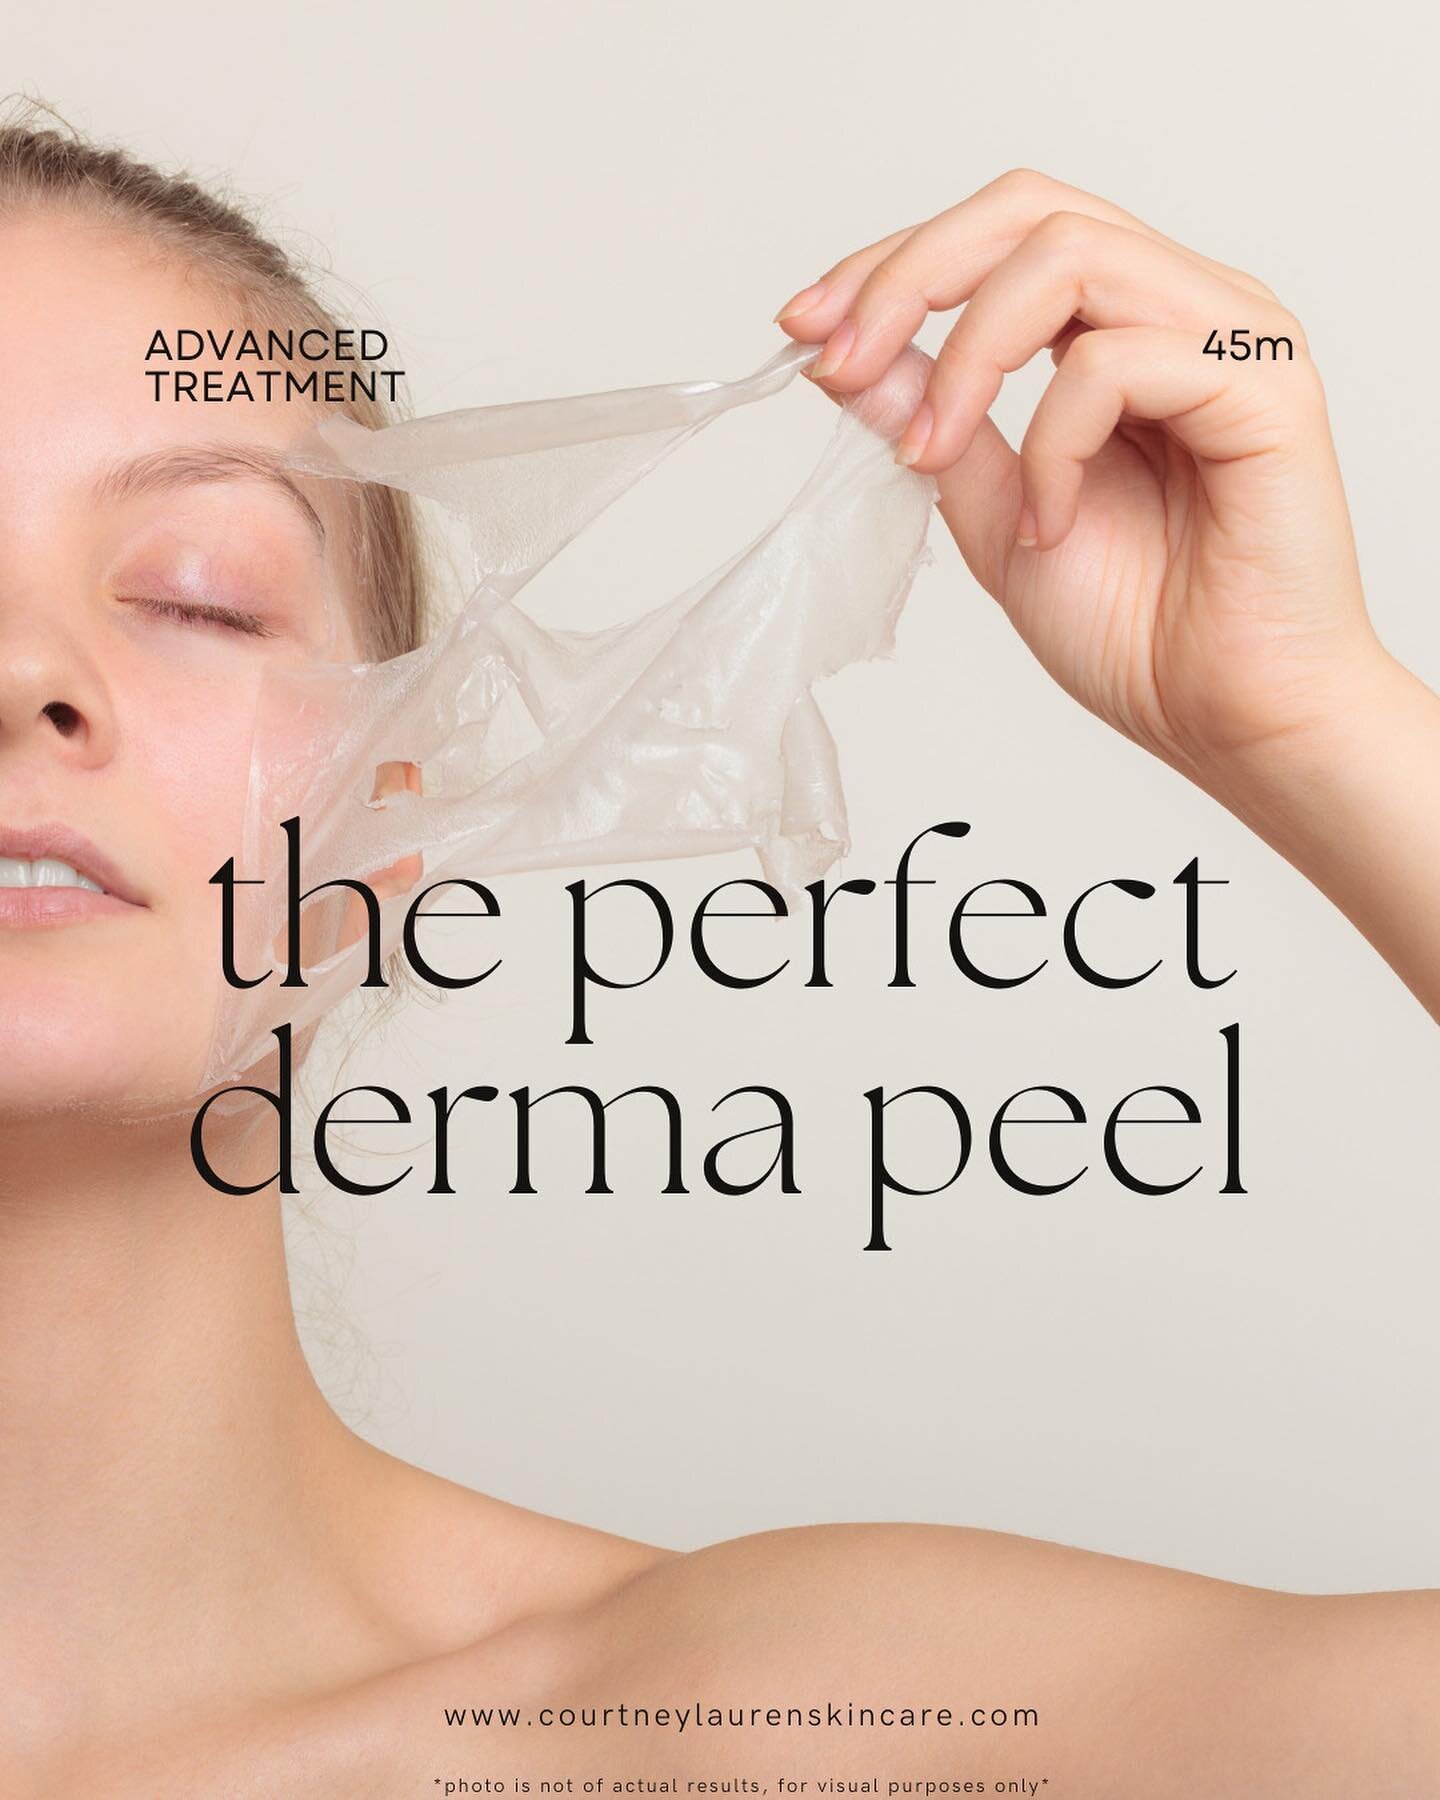 Real results featuring @The Perfect Derma Peel
⠀⠀⠀⠀⠀⠀⠀⠀⠀
It&rsquo;s peel season!! The Perfect Derma Peel combines powerful ingredients with effective acids to deliver outstanding results. 
⠀⠀⠀⠀⠀⠀⠀⠀⠀
Our client has had 3 perfect derma peels (spaced ap